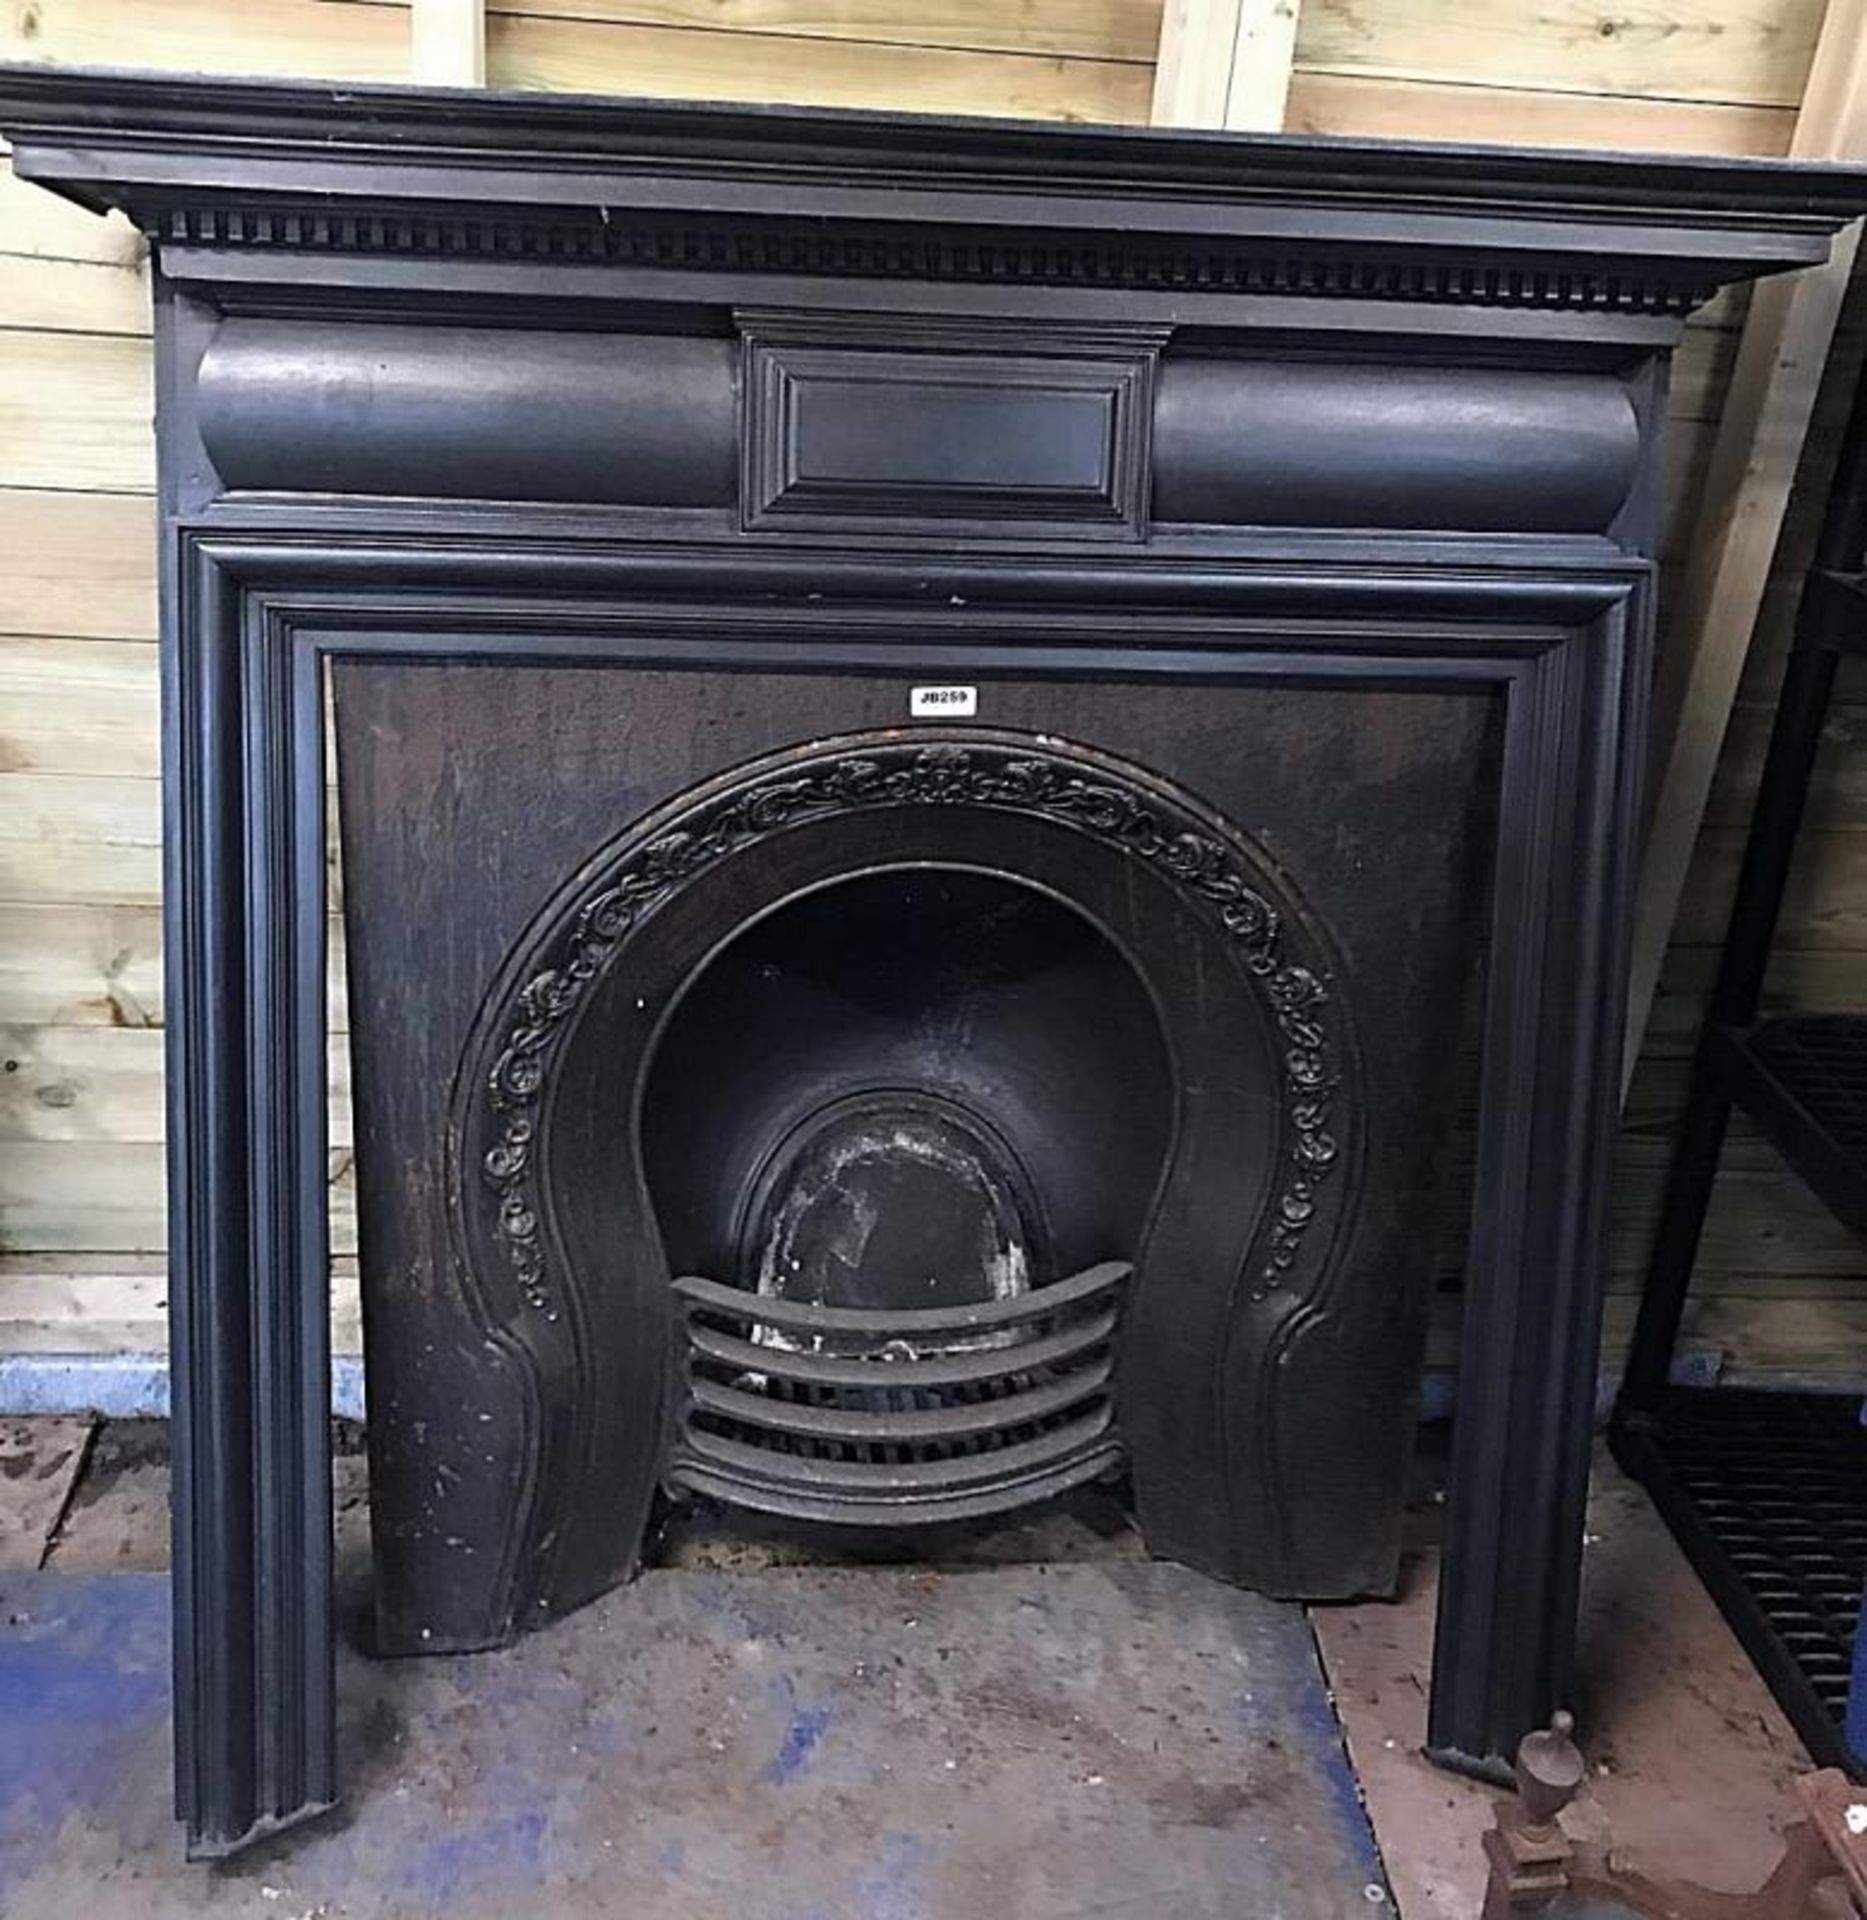 1 x Stunning Antique Victorian Cast Iron Fire Surround with Horseshoe Insert - Dimensions: Height